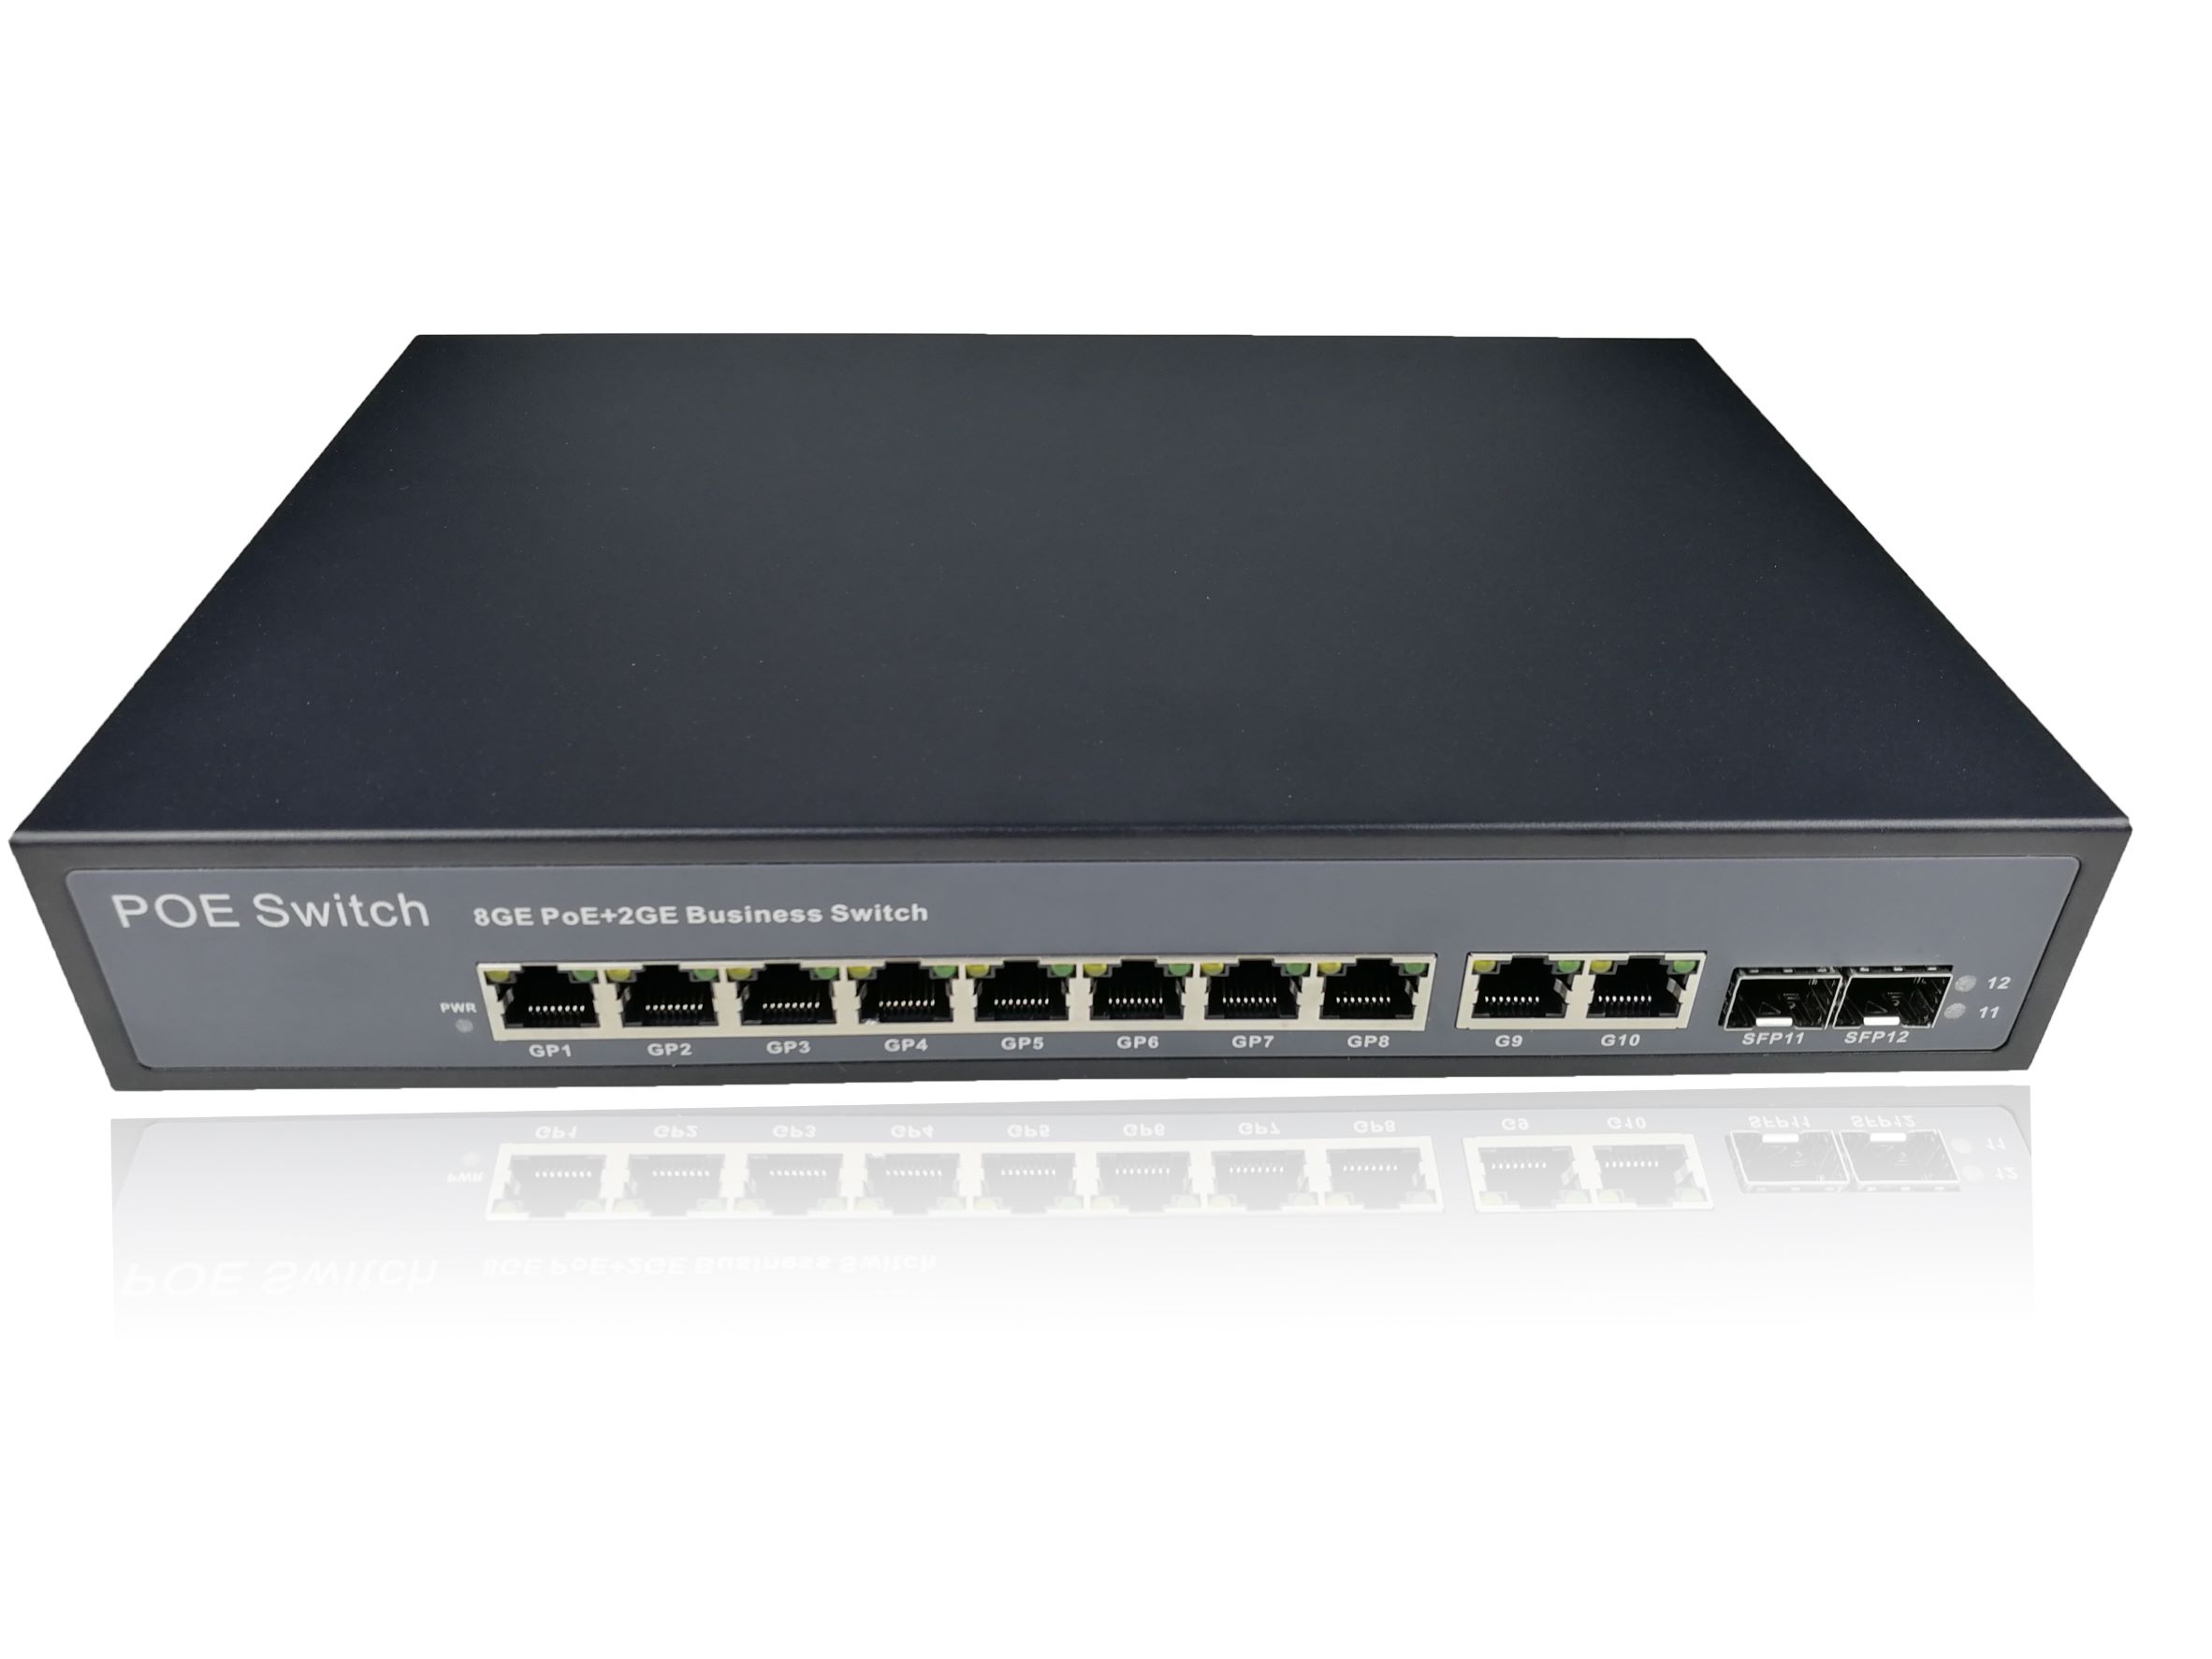 8 10/100/1000 Ethernet ports, 2 10/100/1000 Ethernet ports and 2 1000 Gigabit SFP ports. All 8 ports support IEEE 802.3af/at standard power supply